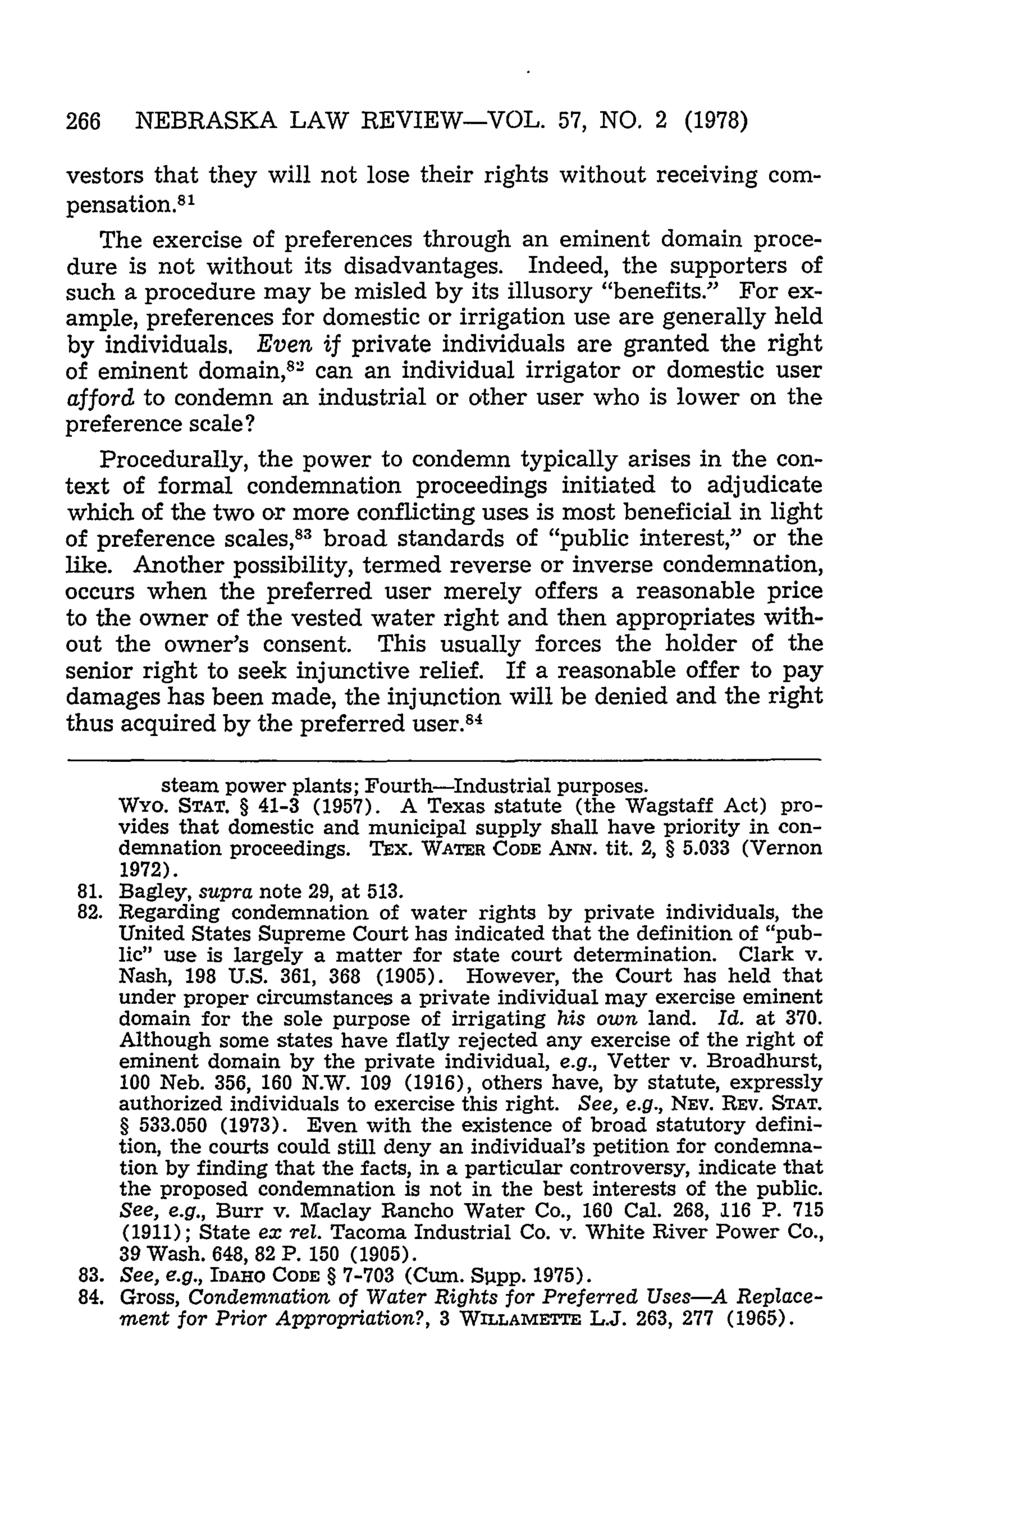 266 NEBRASKA LAW REVIEW-VOL. 57, NO. 2 (1978) vestors that they will not lose their rights without receiving compensation.